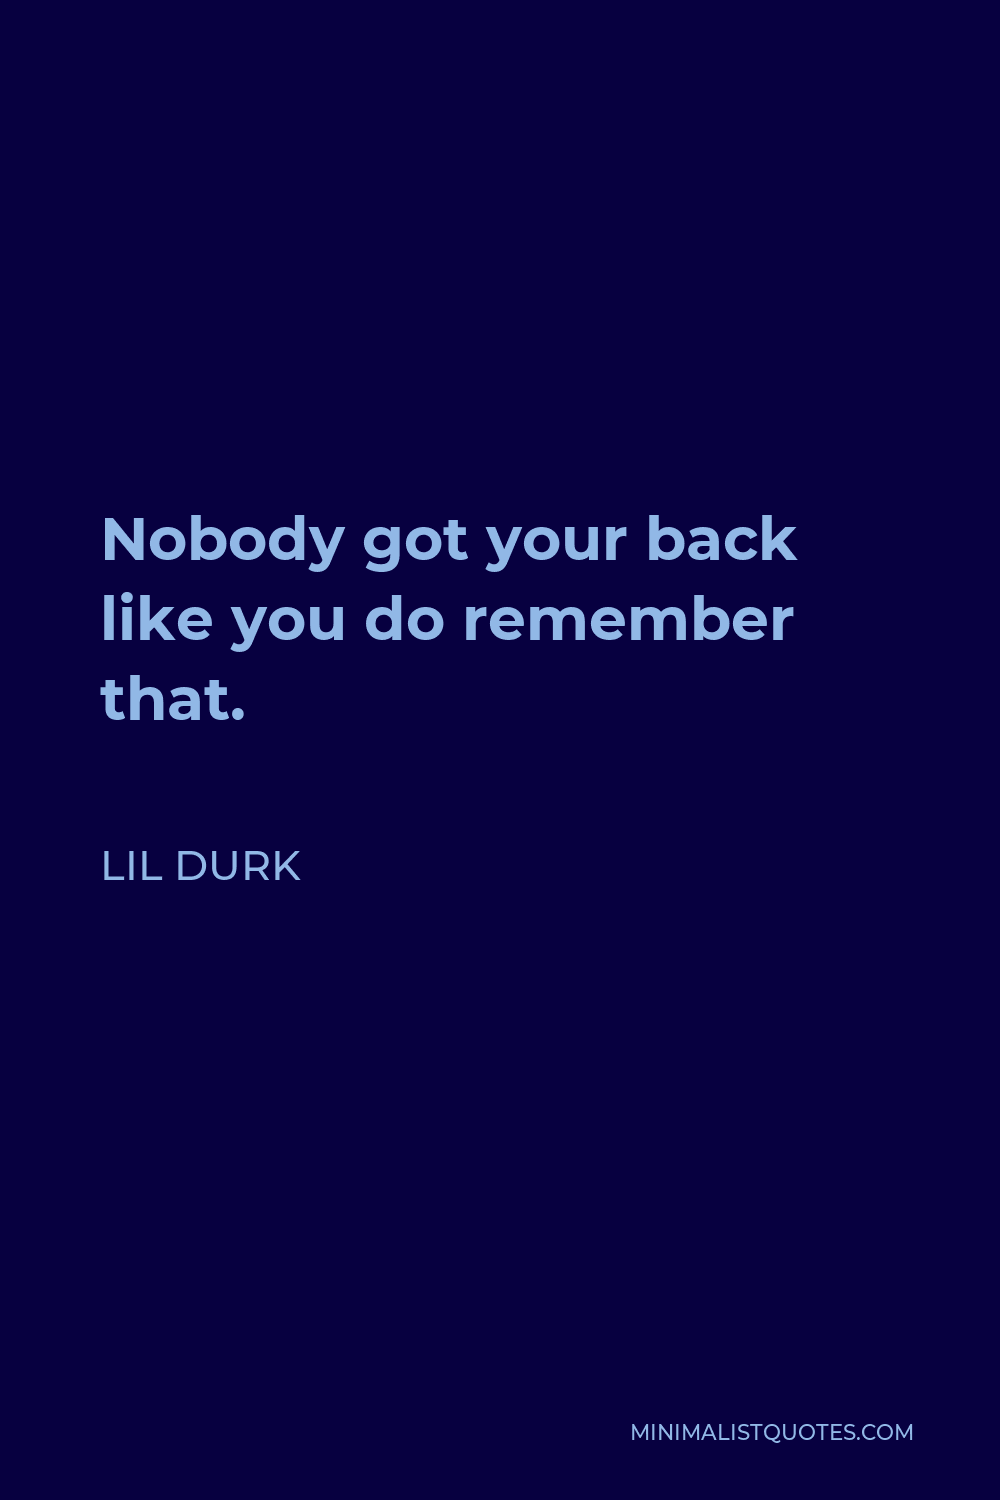 Lil Durk Quote - Nobody got your back like you do remember that.